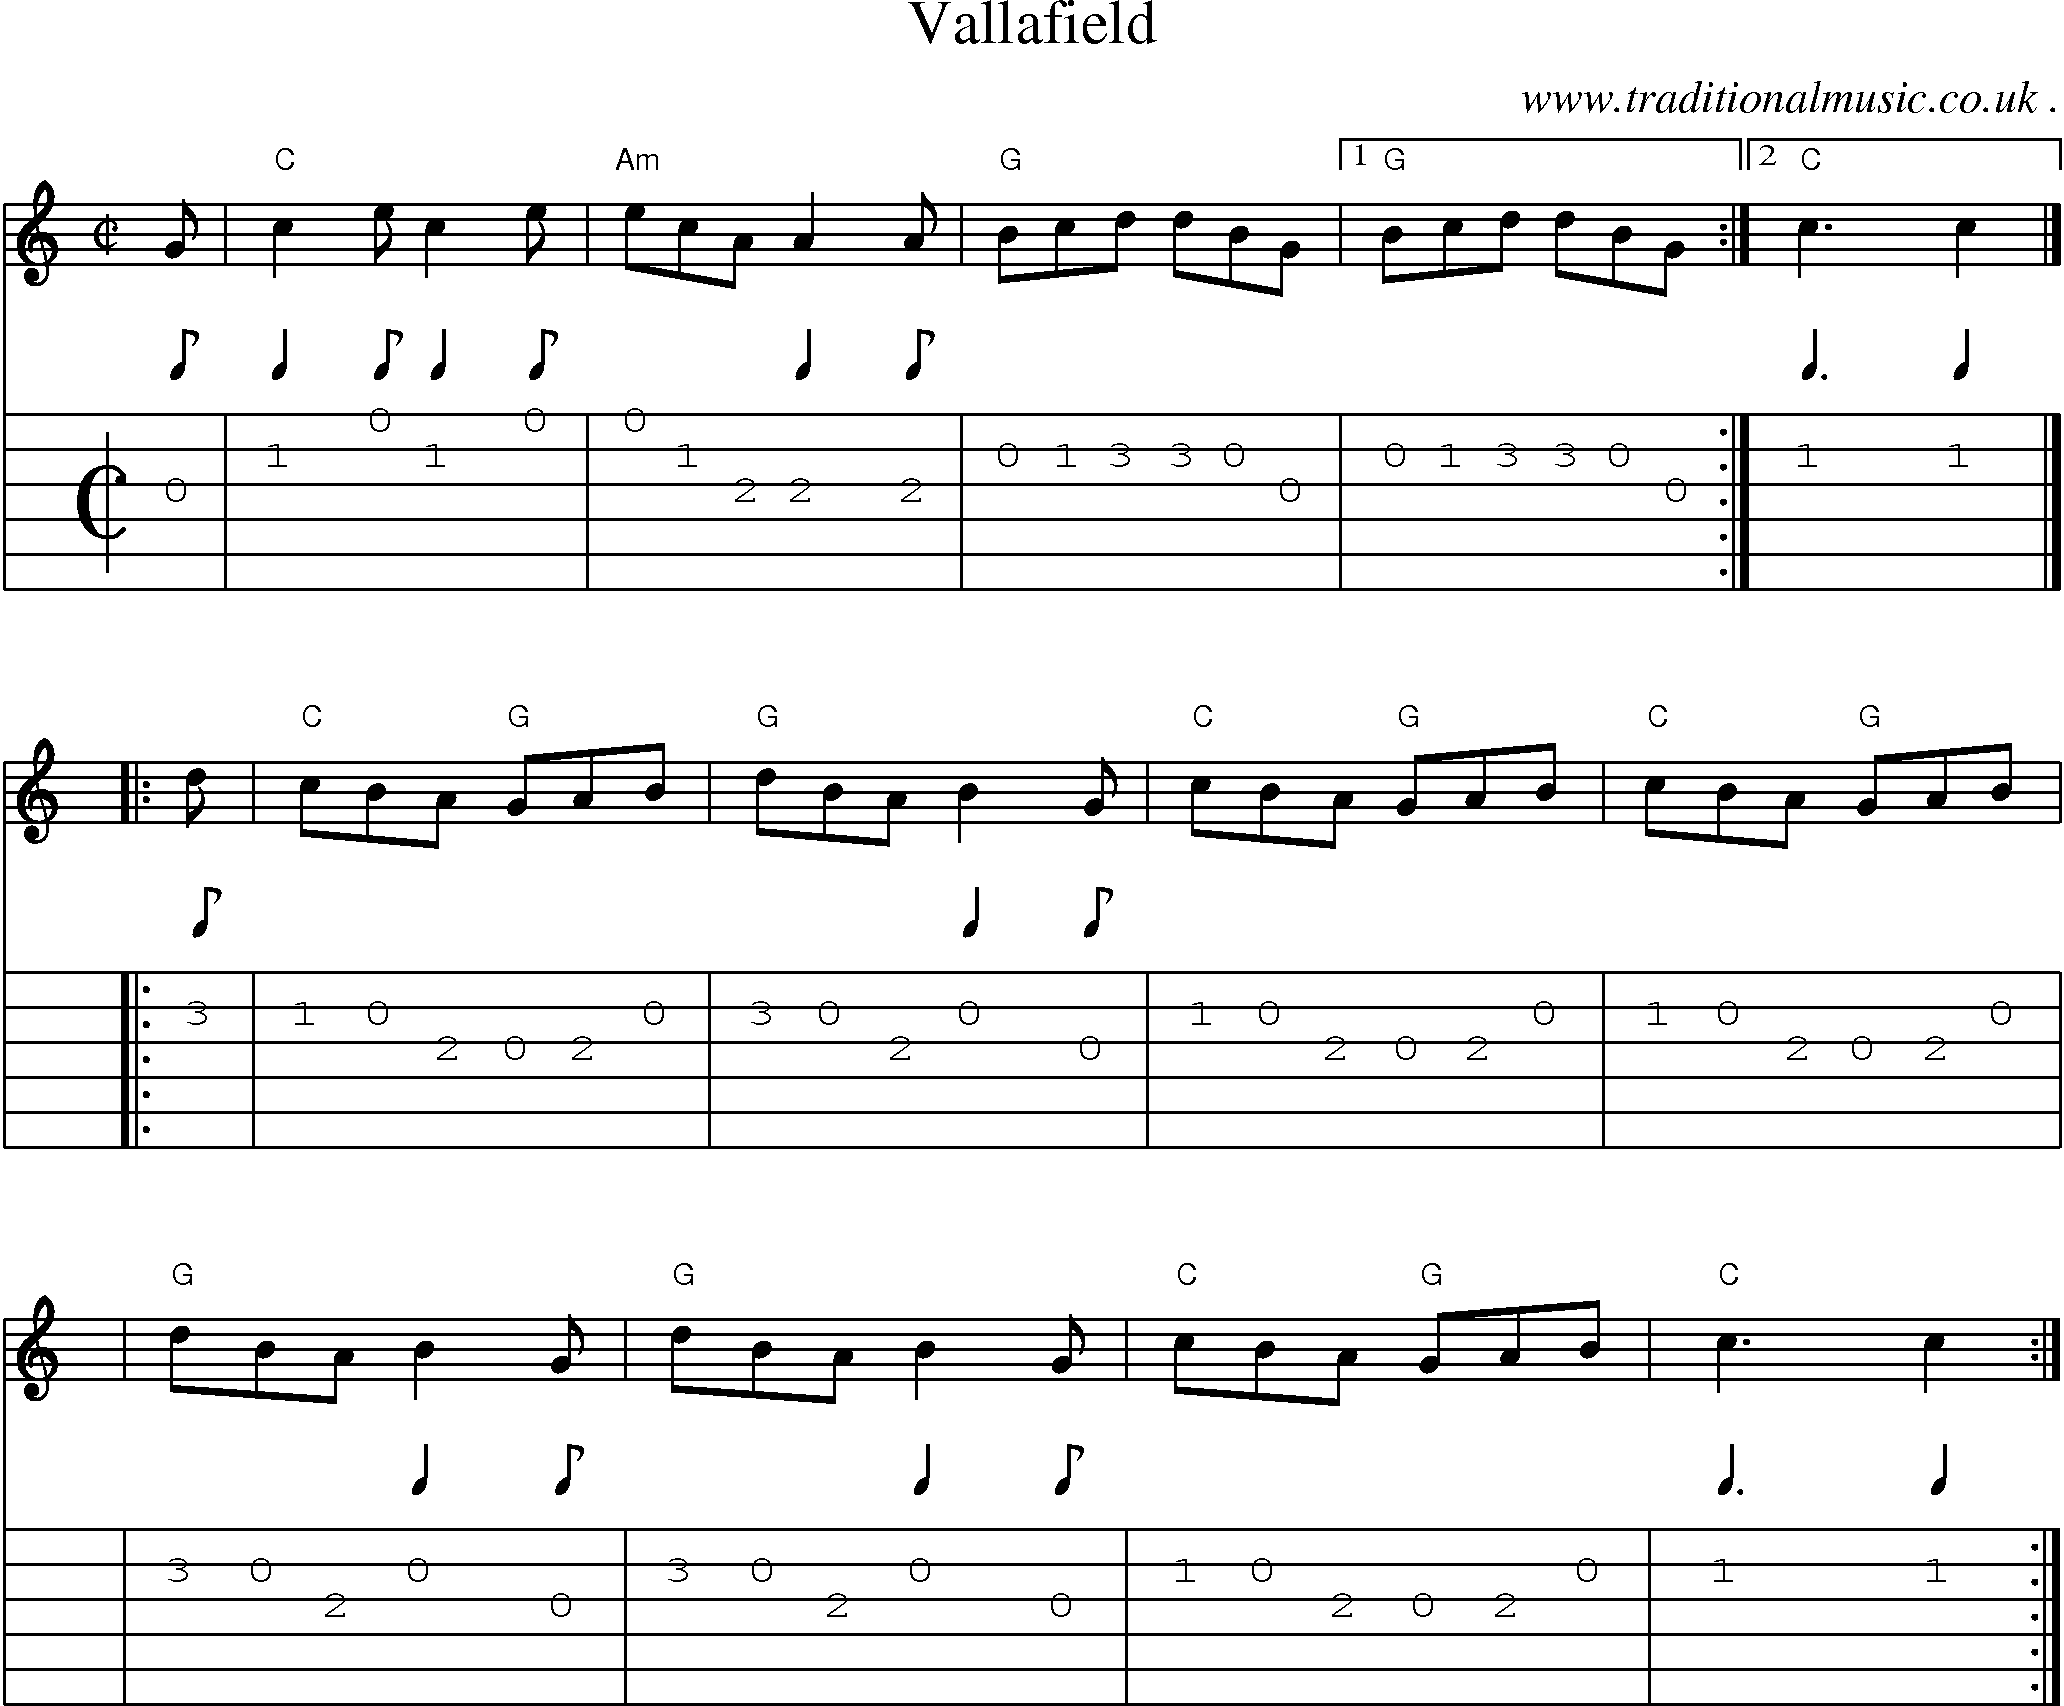 Sheet-music  score, Chords and Guitar Tabs for Vallafield